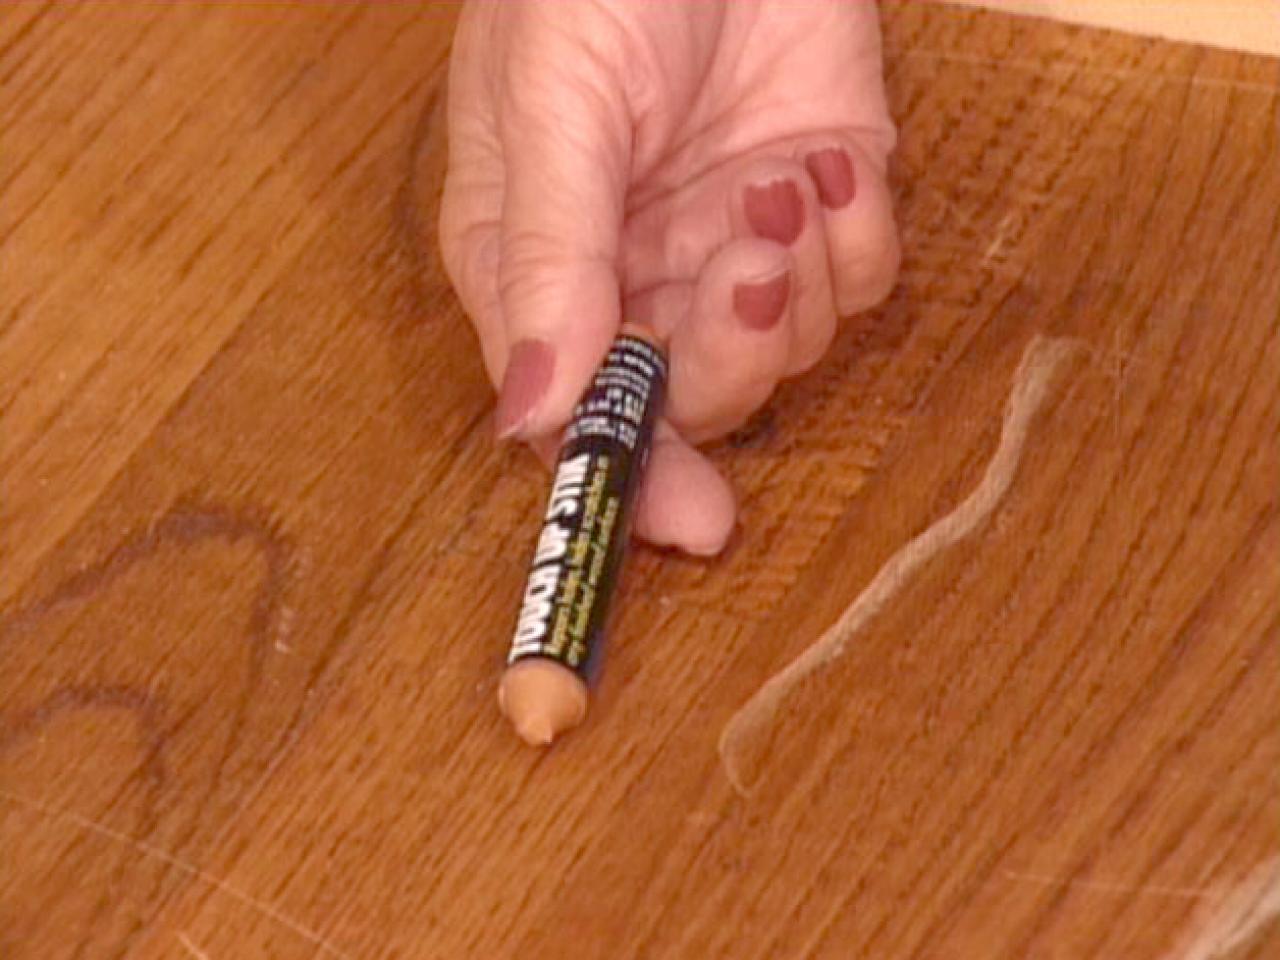 How To Touch Up Wood Floors Tos Diy, Remove Scuffs From Hardwood Floors